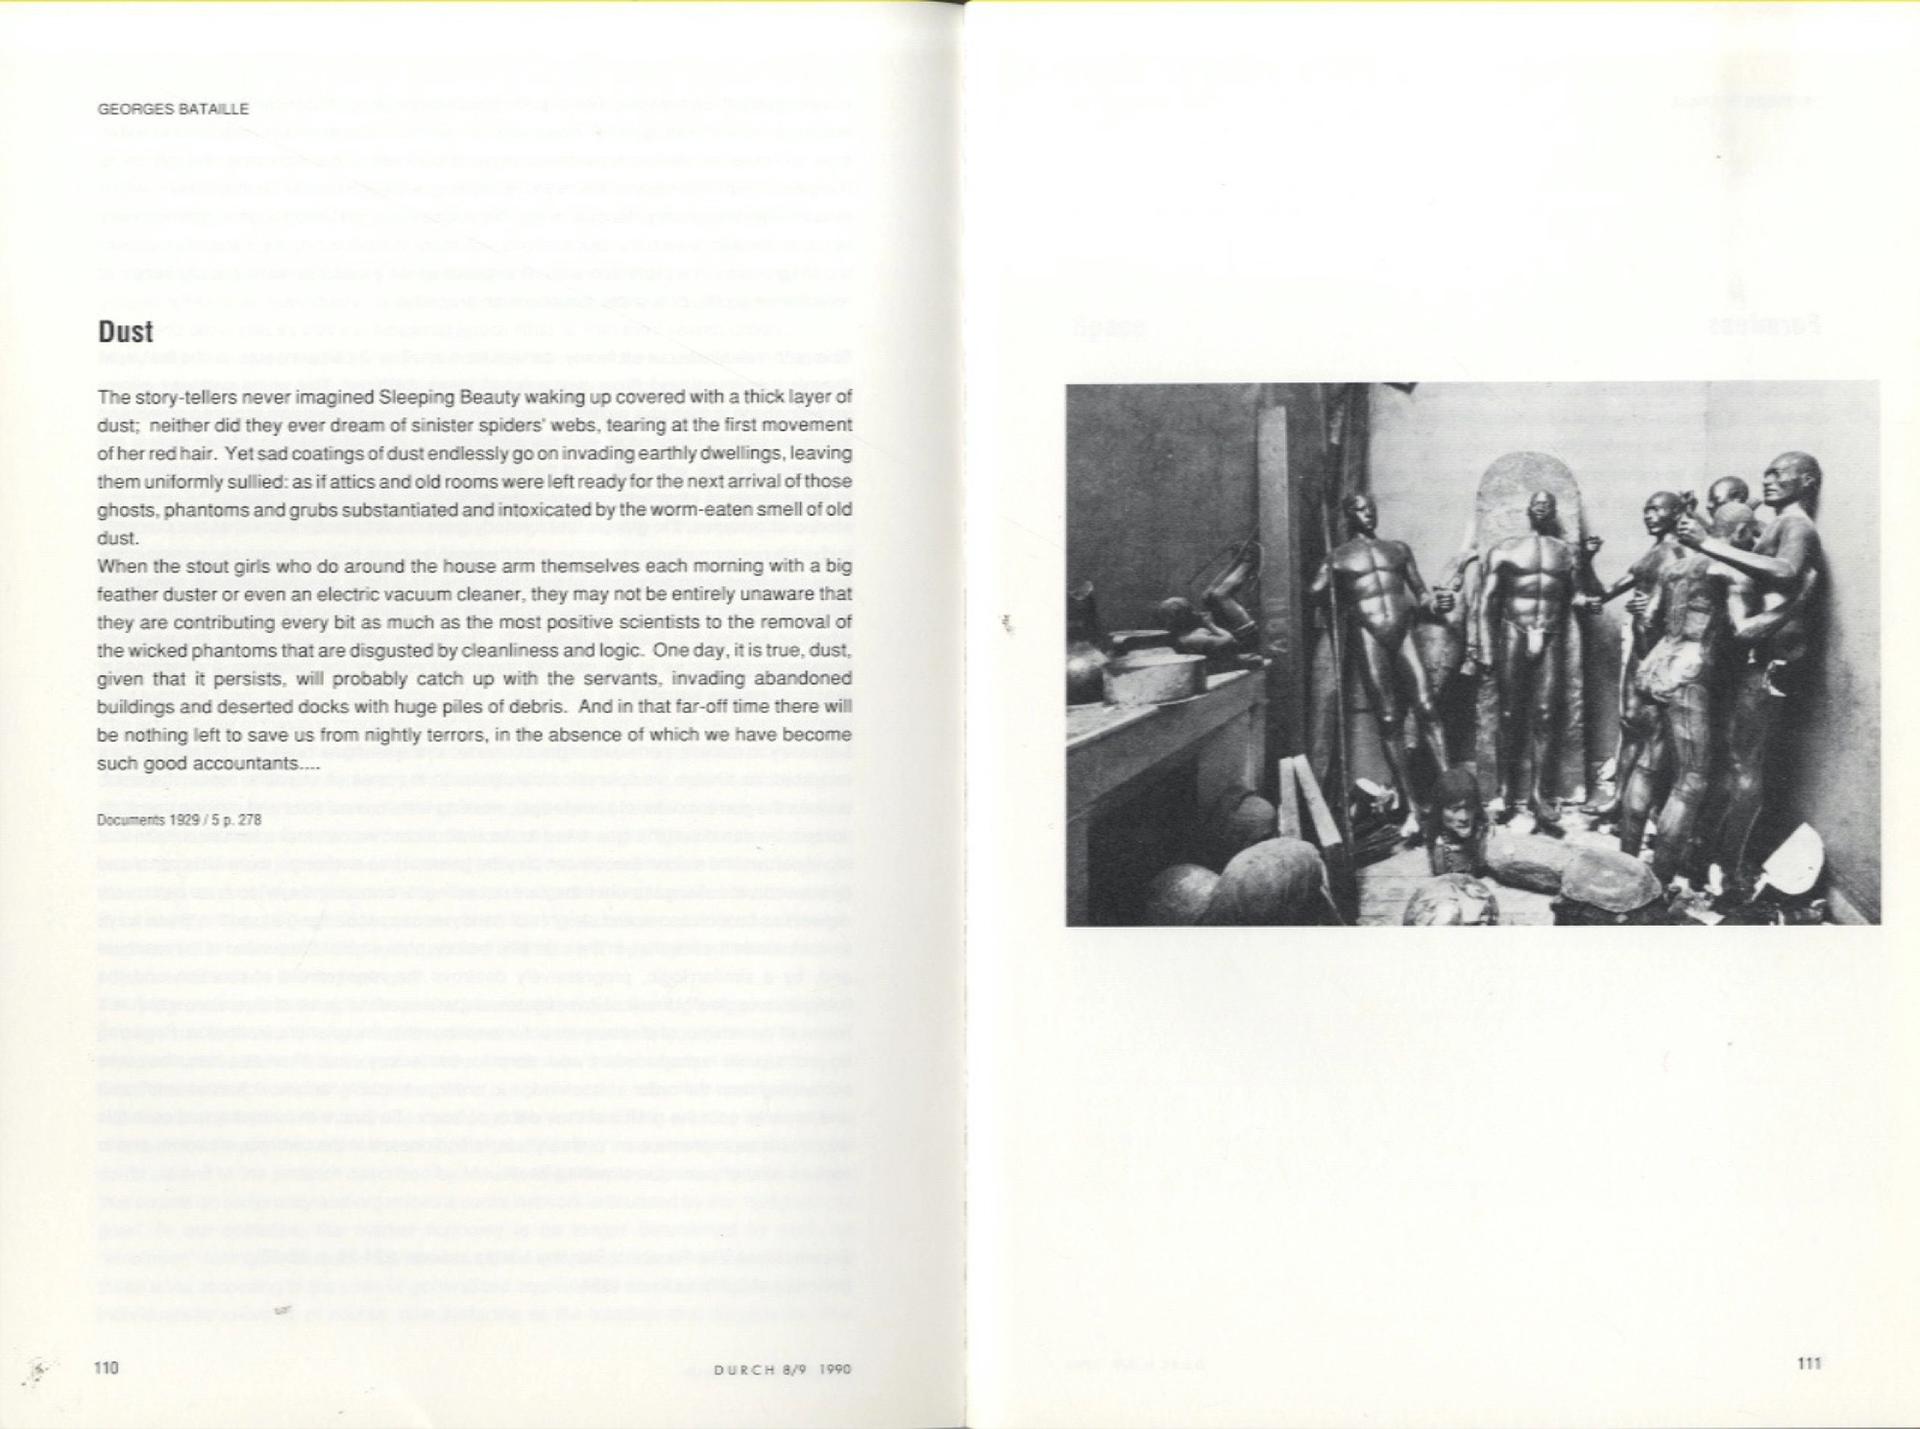 George Bataille, “Dust”, Documents 1929, reprinted in Durch 8/9, 1990.